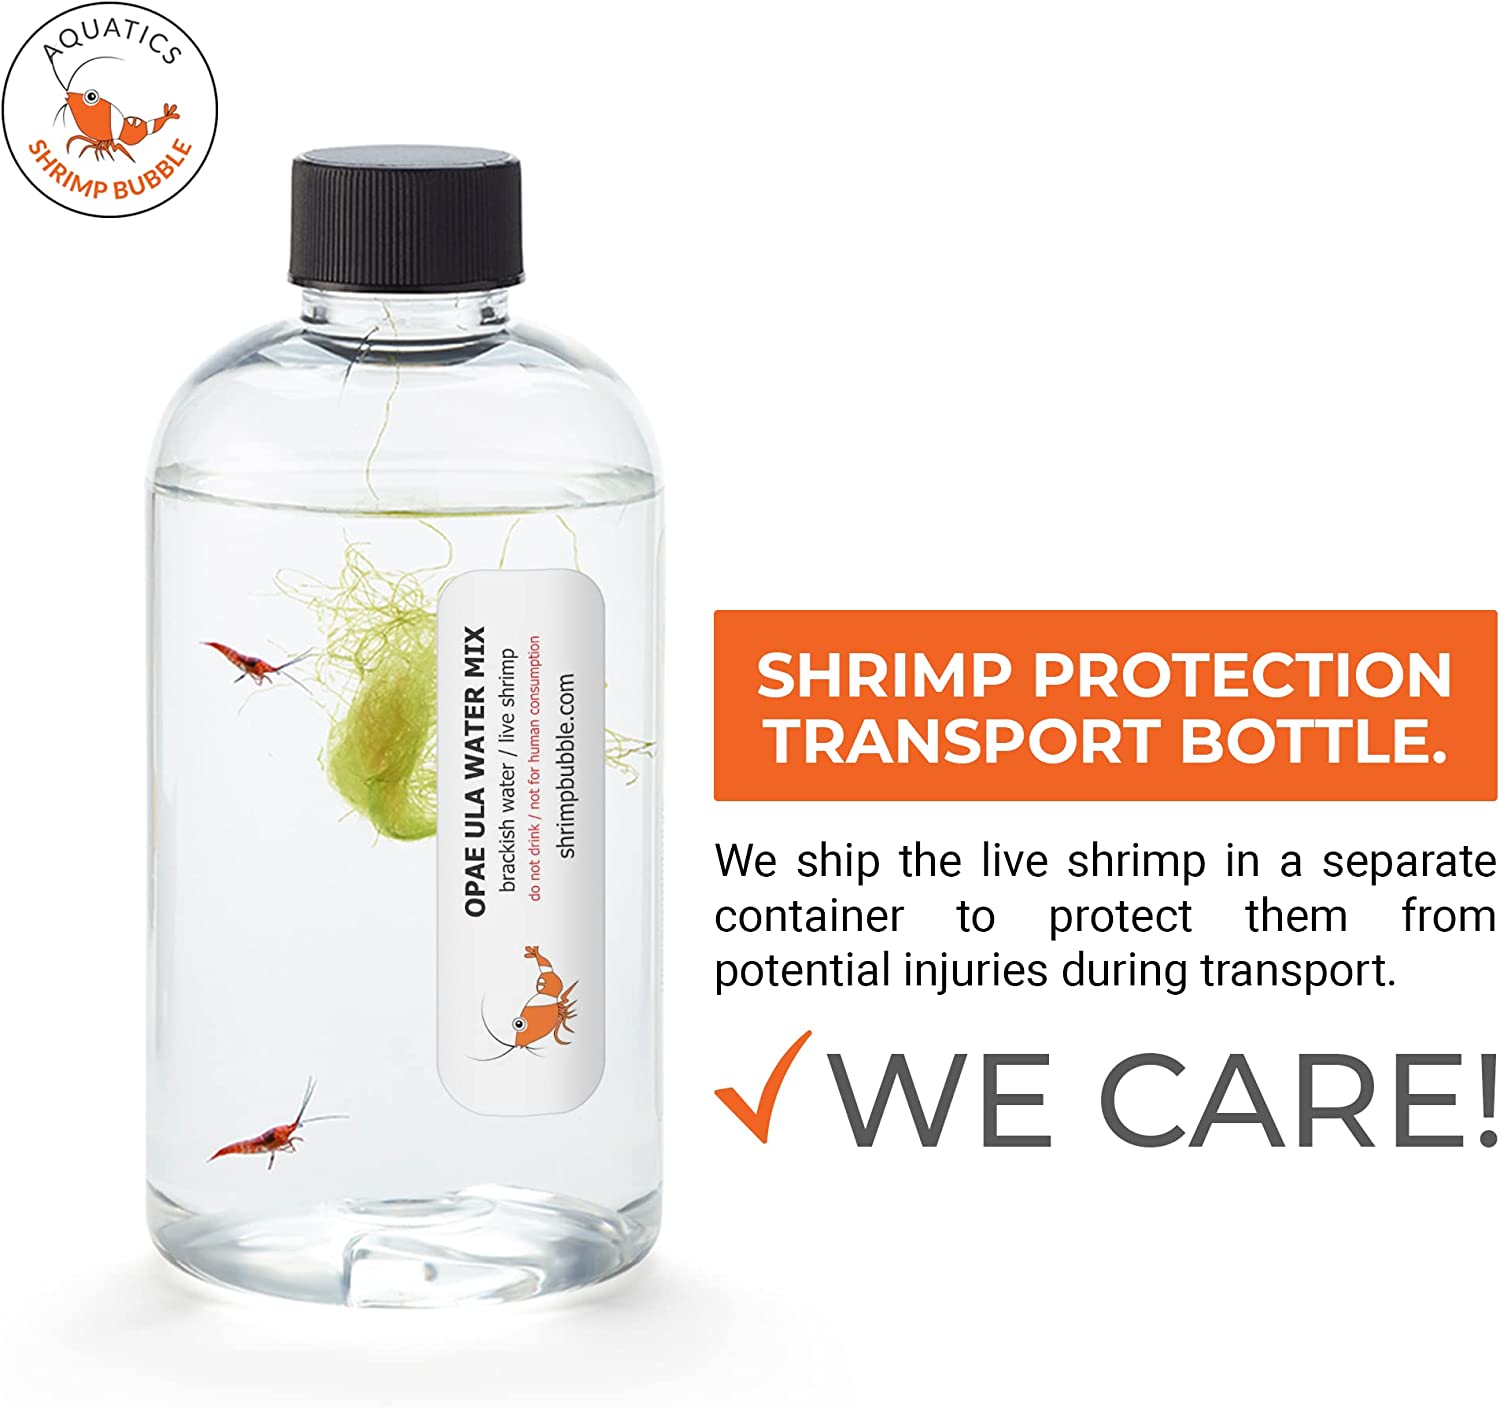 A small clear container containing live shrimp. There is text which says, 'Shrimp protection transport bottle. We ship the live shrimp in a separate container to protect them from potential injuries during transport.'